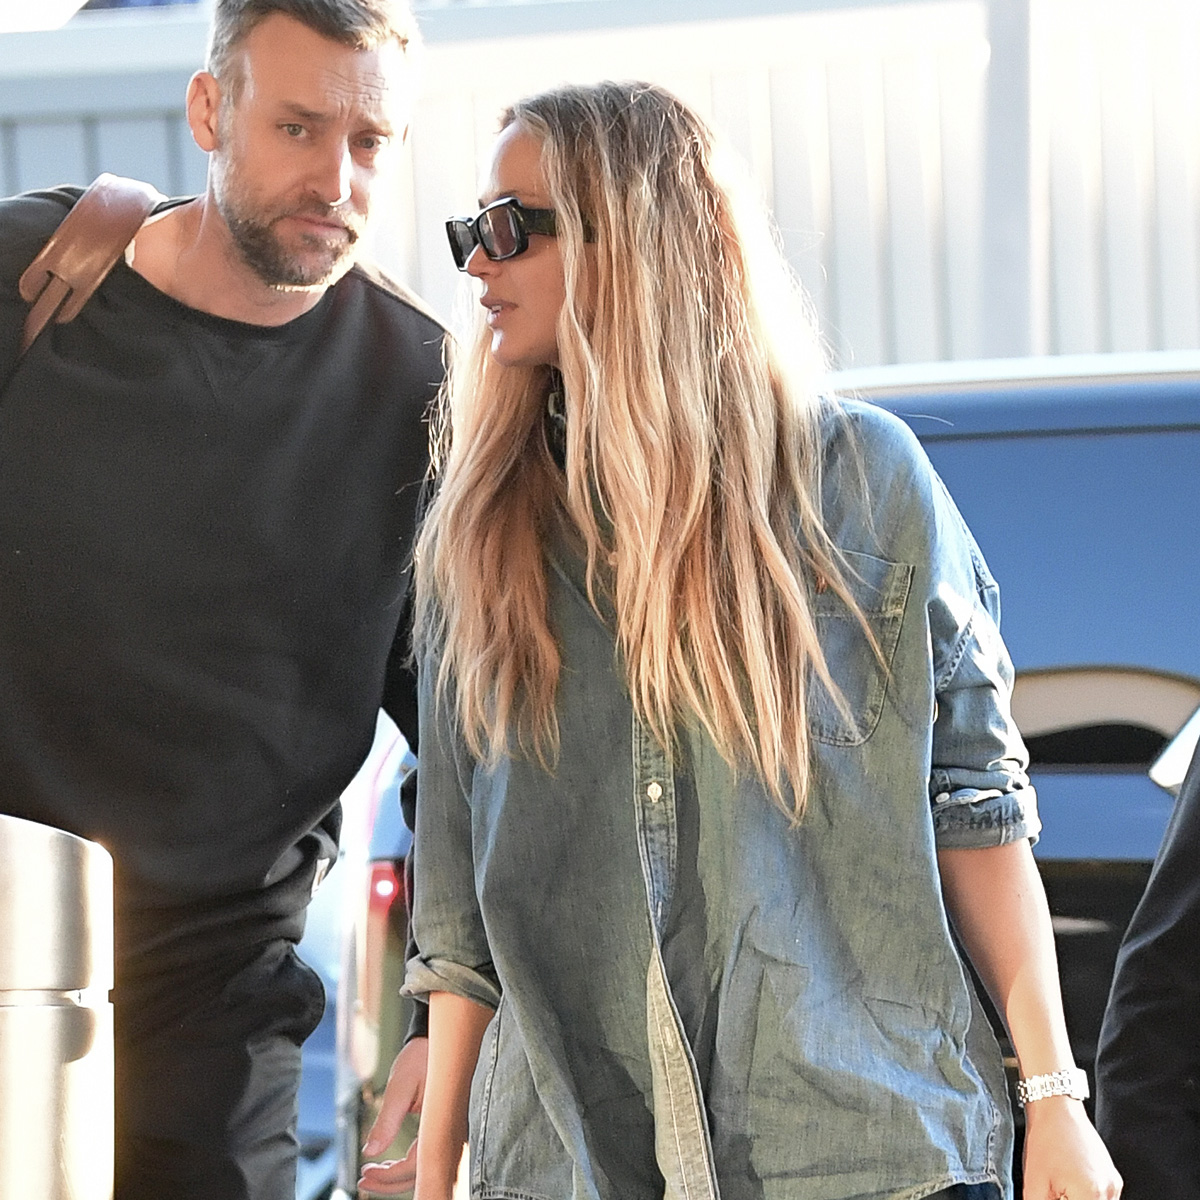 Jennifer Lawrence Wore the Denim Trend I'd Never Choose For the Airport